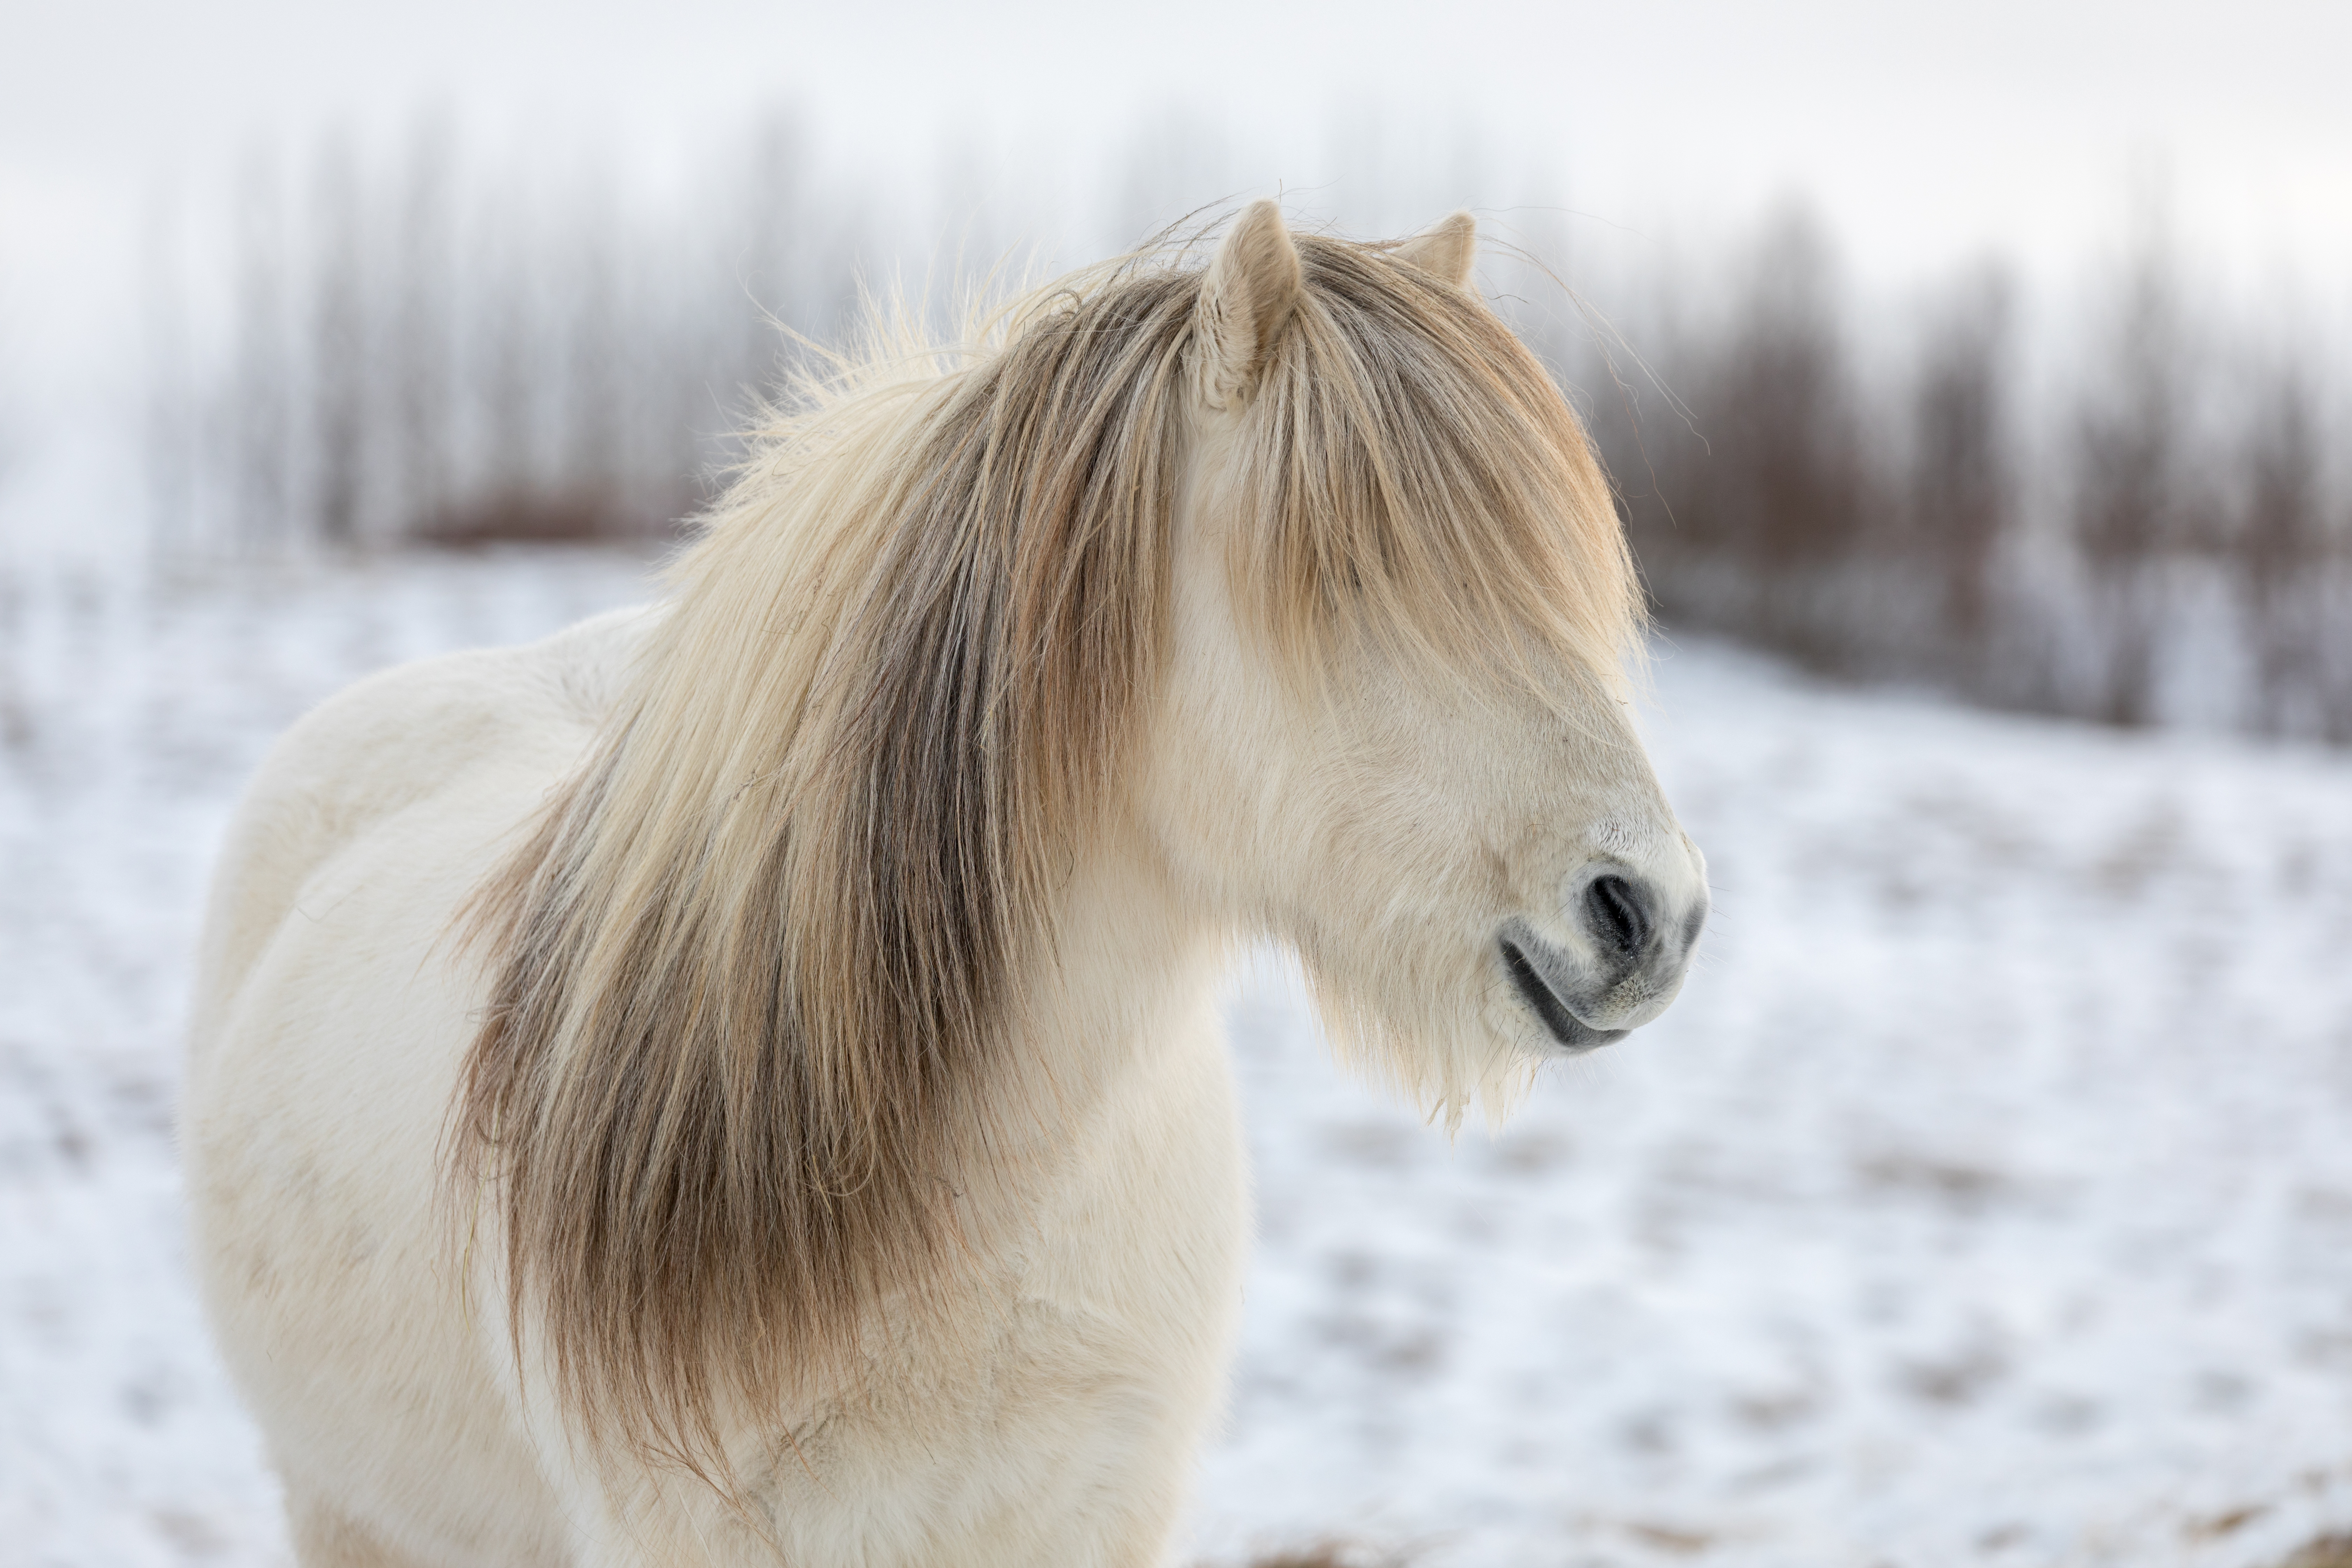 An Icelandic horse standing in a snowy field.